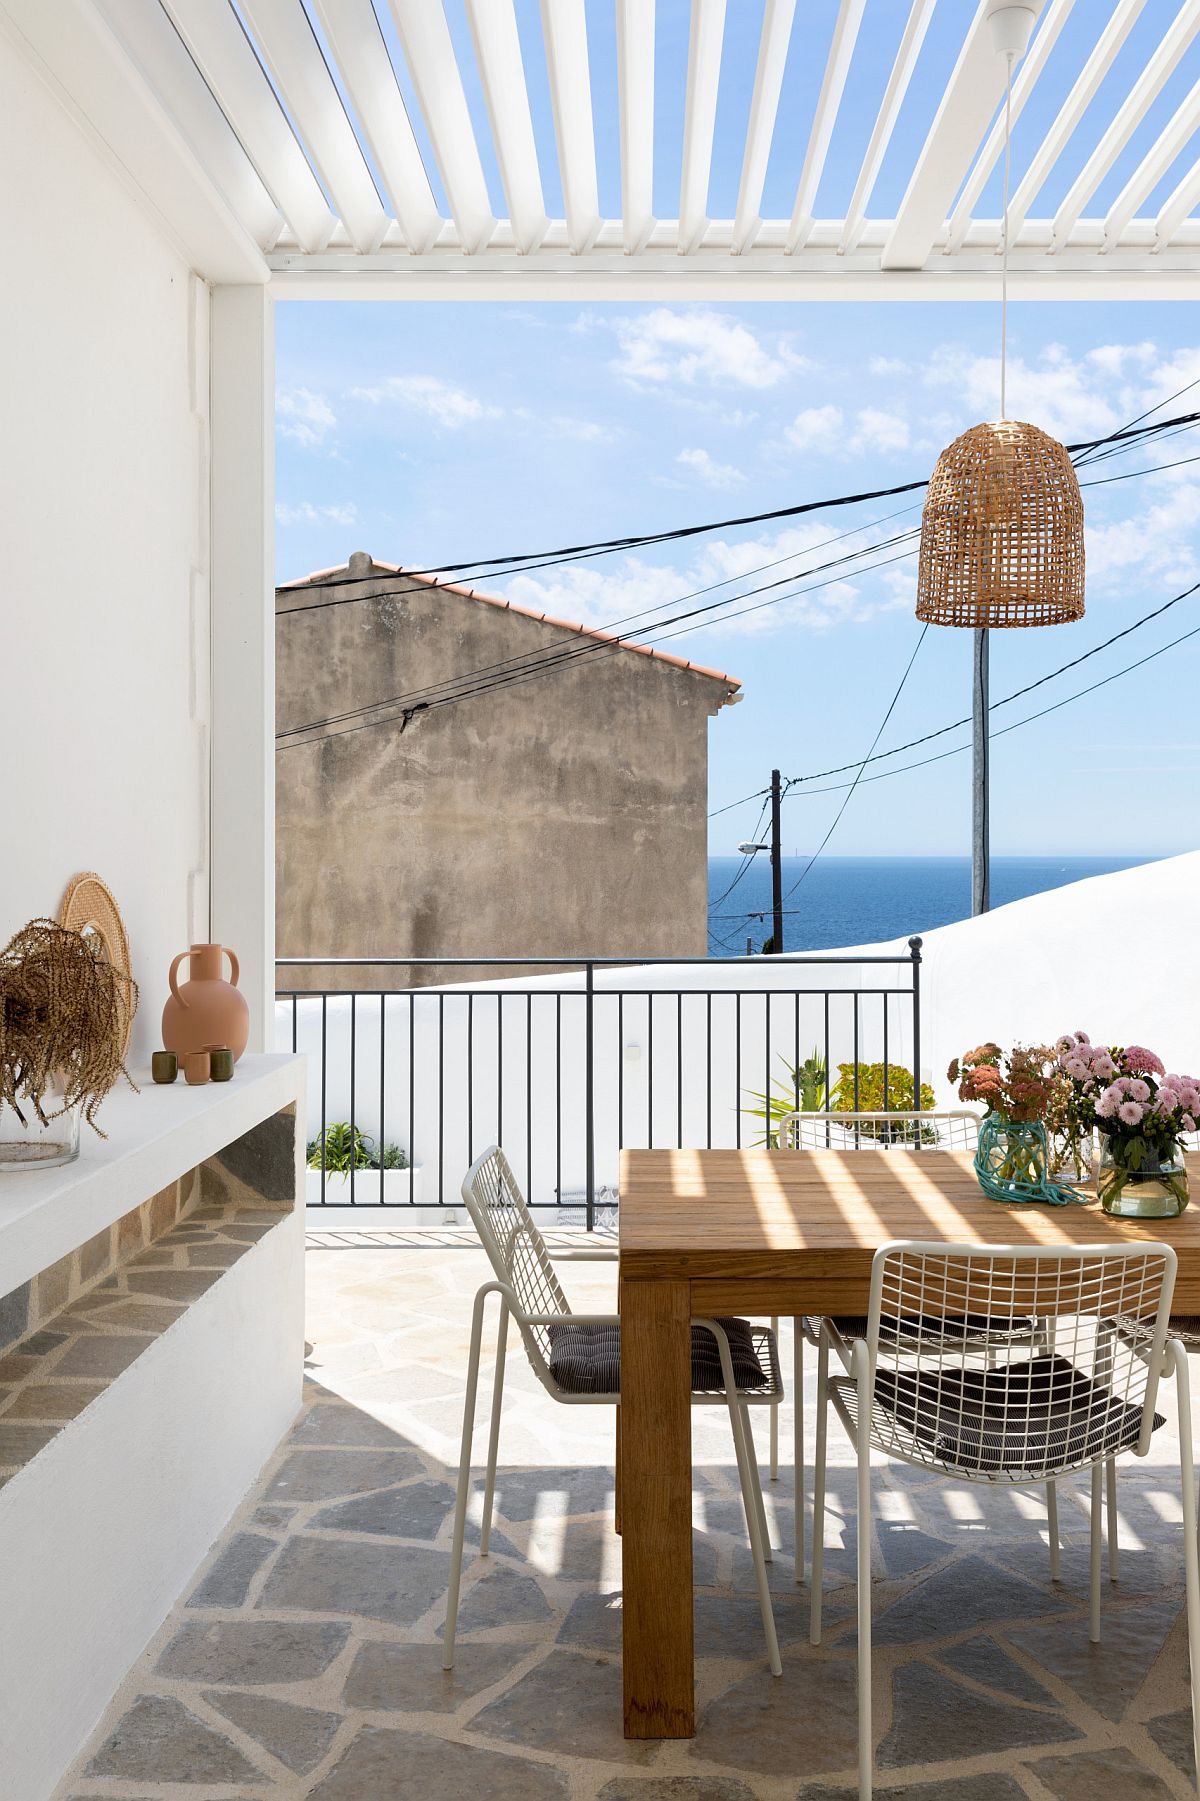 Understated modern patio in white can be easily turned into one with charming Mediterranean style